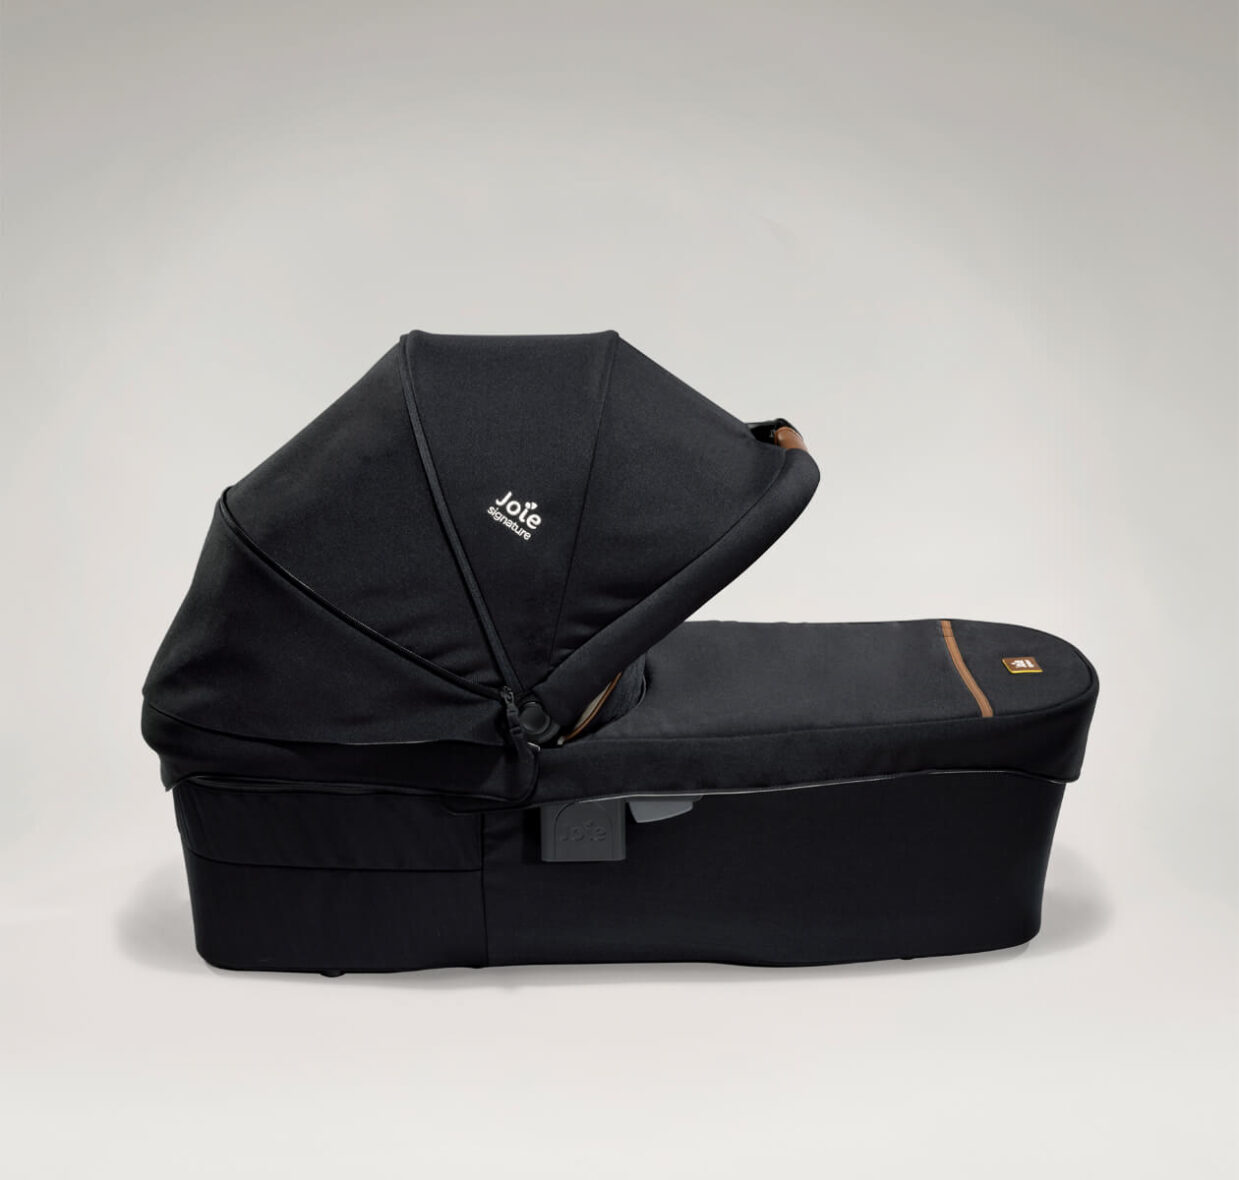 p3-joie-signature-carrycot-ramblexl-eclipse-right-profile-canopy-extended